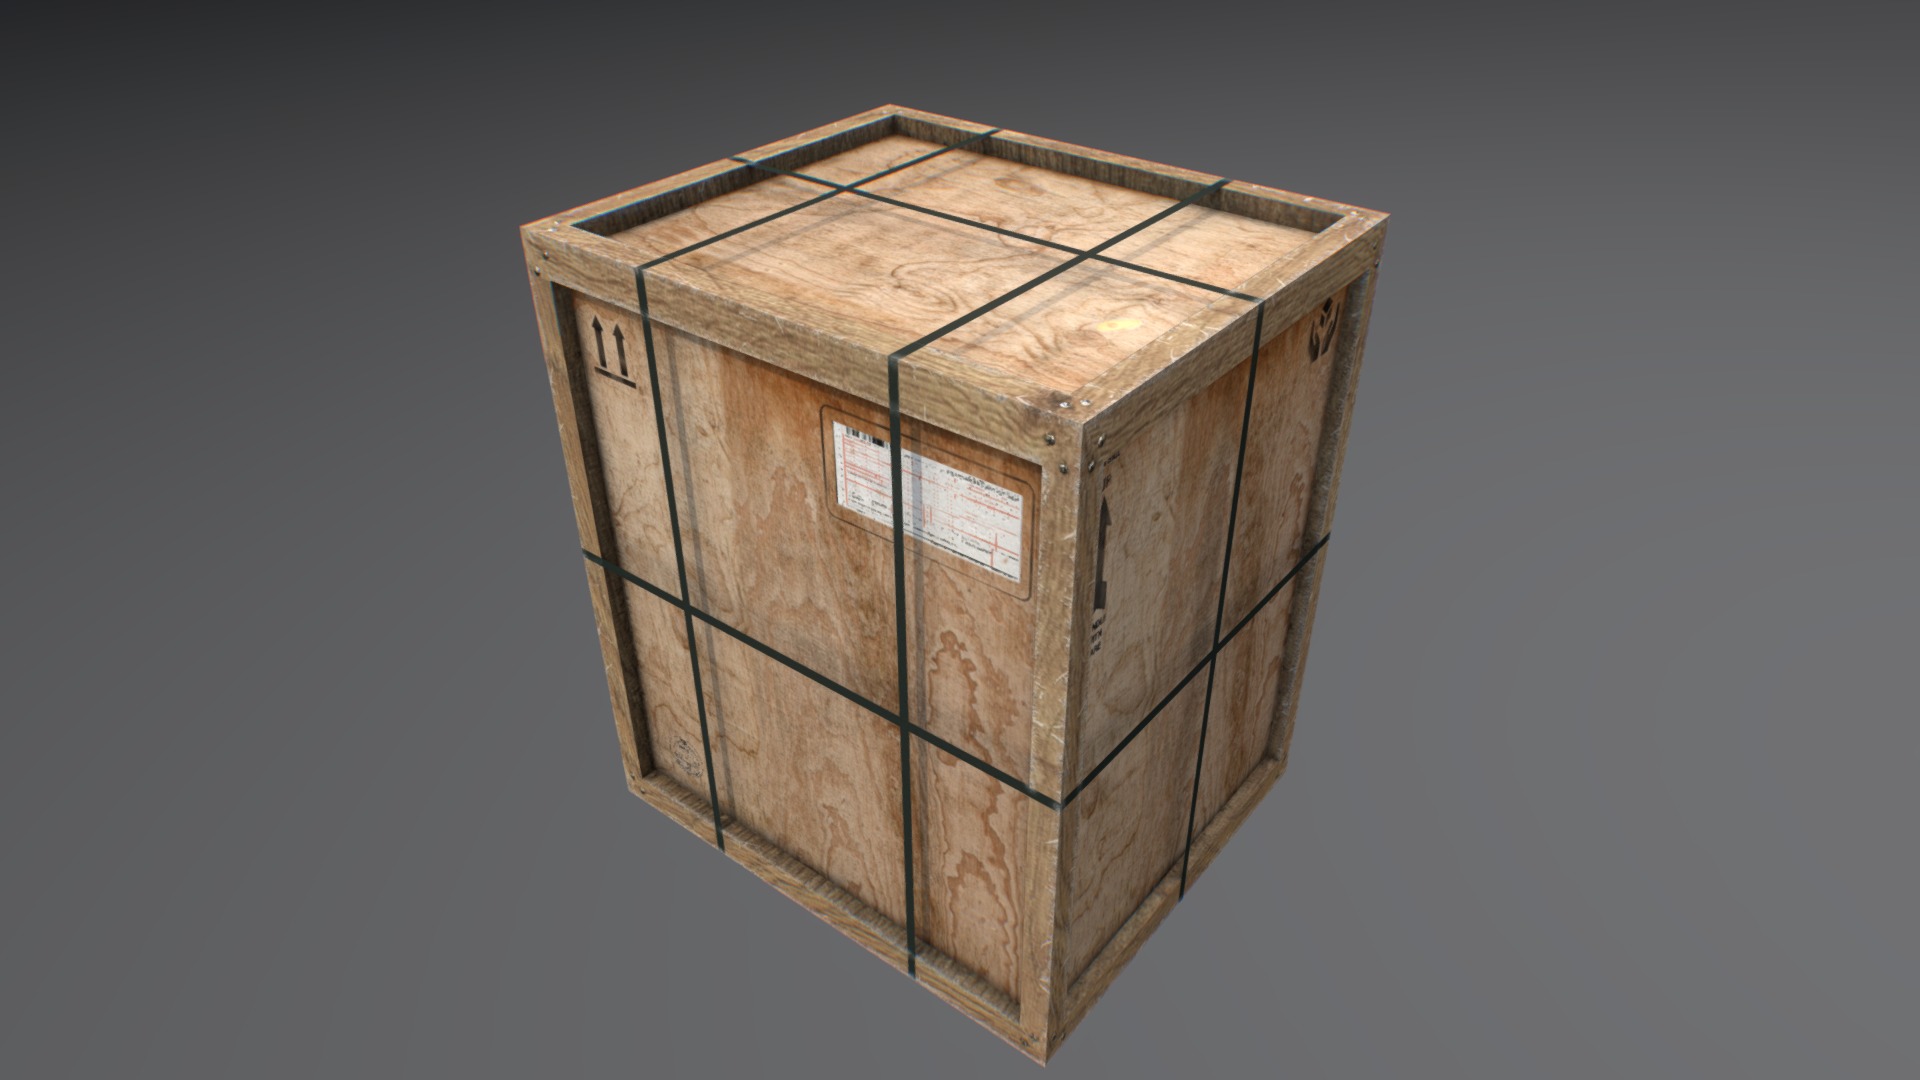 3D model Old wooden cargo crate 9 - This is a 3D model of the Old wooden cargo crate 9. The 3D model is about a wooden birdhouse with a window.